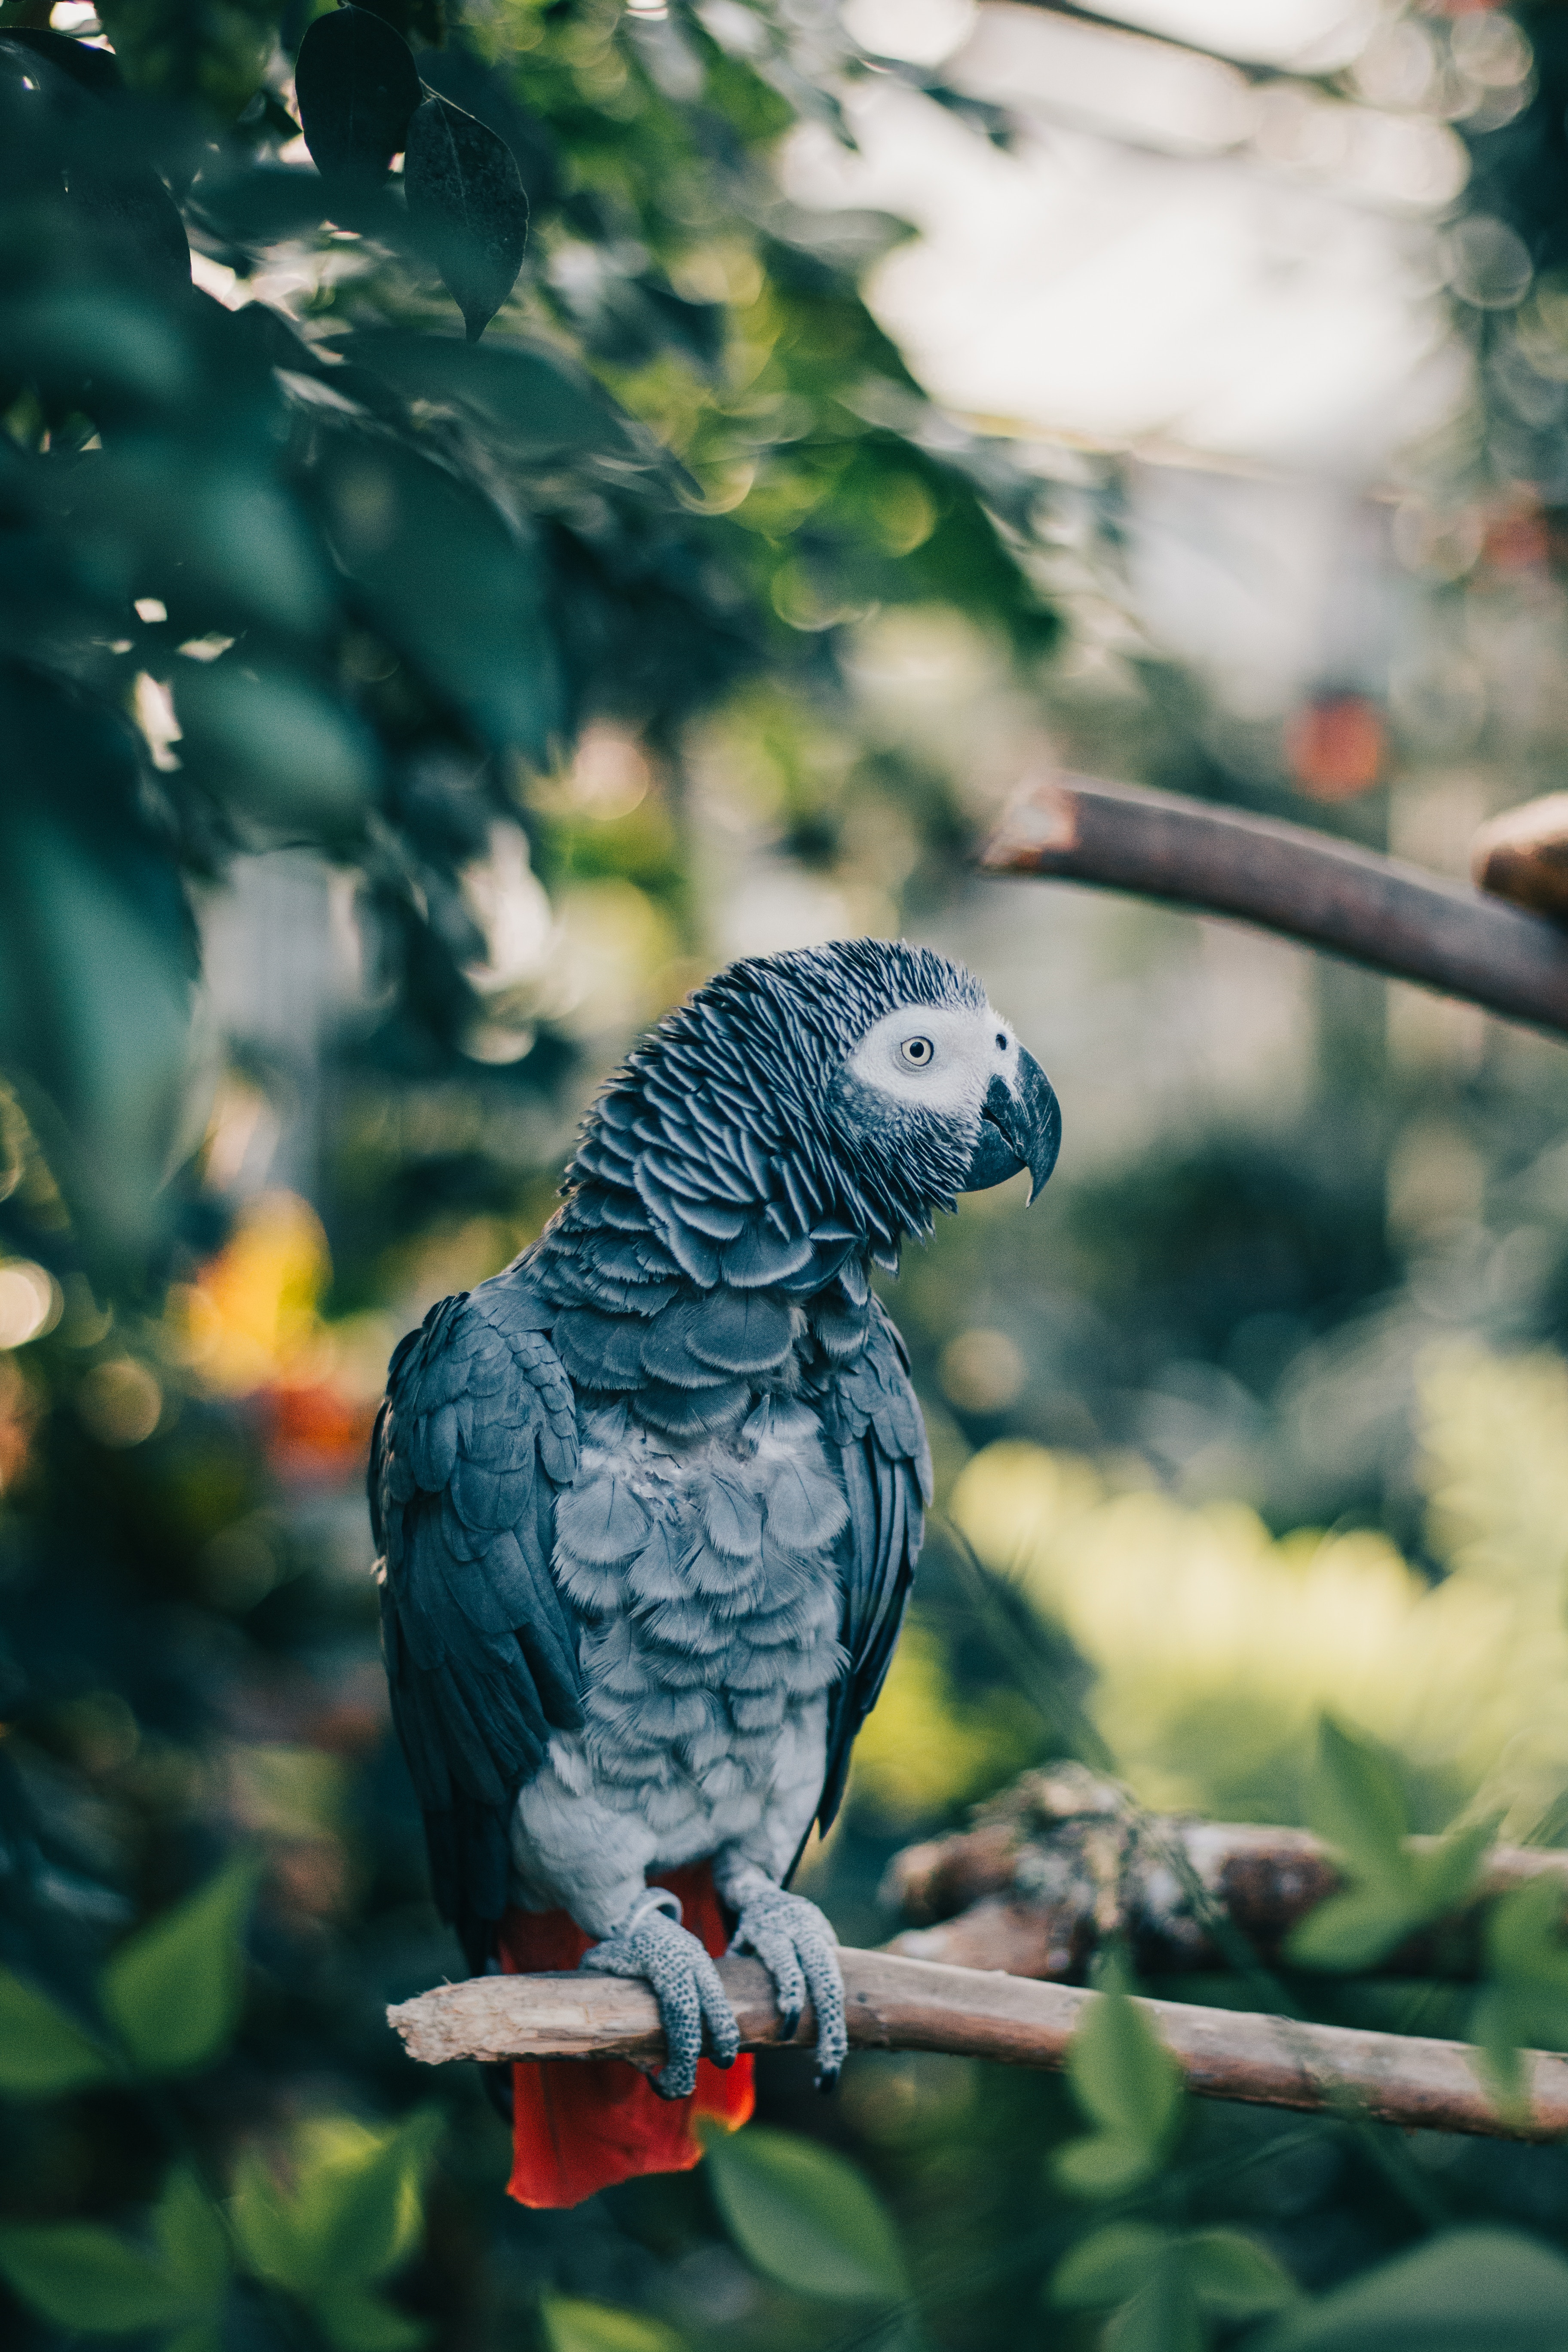 105047 download wallpaper animals, parrots, bird, branch, jaco screensavers and pictures for free